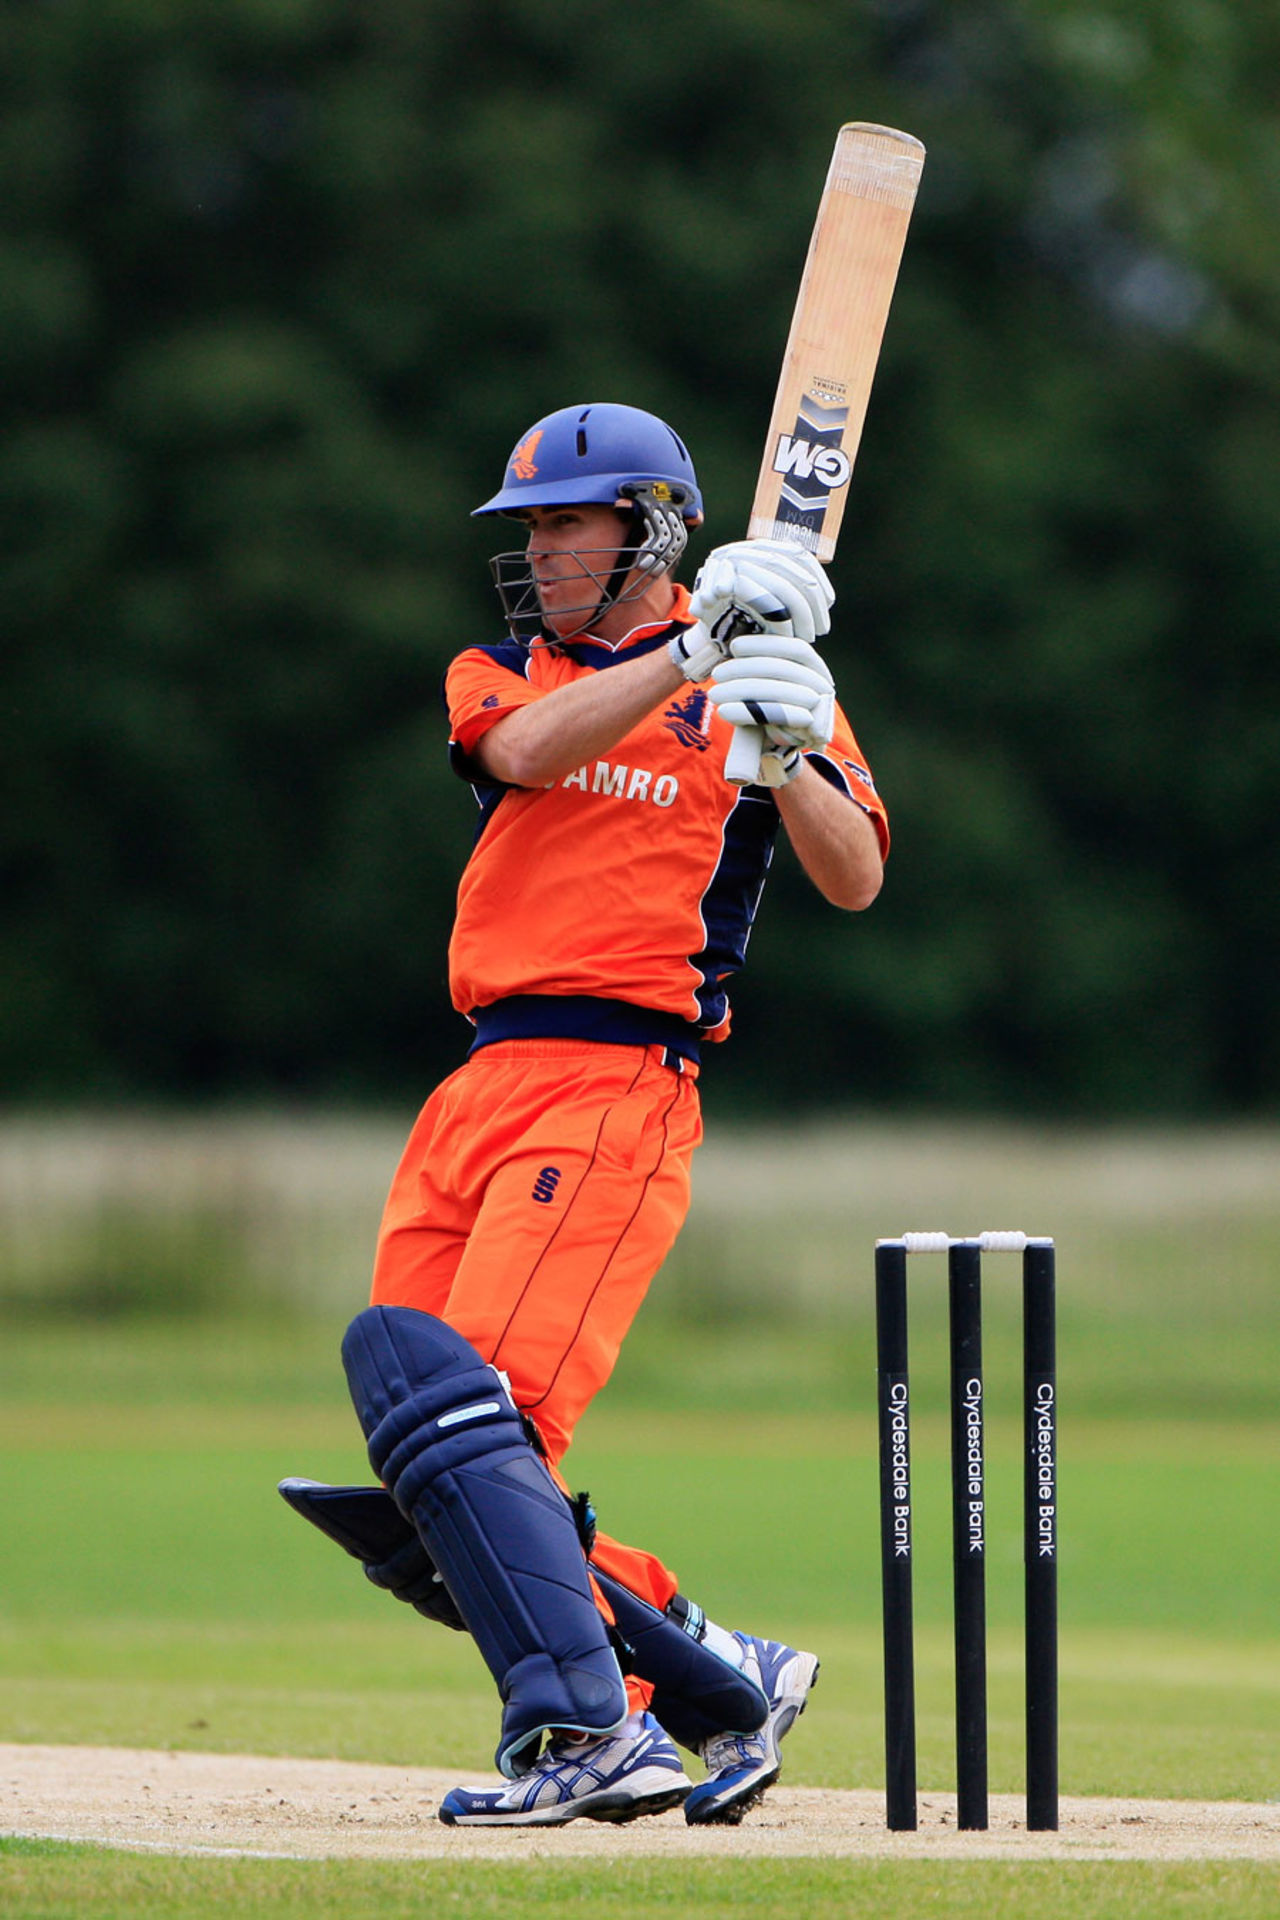 Cameron Borgas scored 2, Netherlands v Worcestershire, CB40 Group A, The Hague, June, 8, 2012